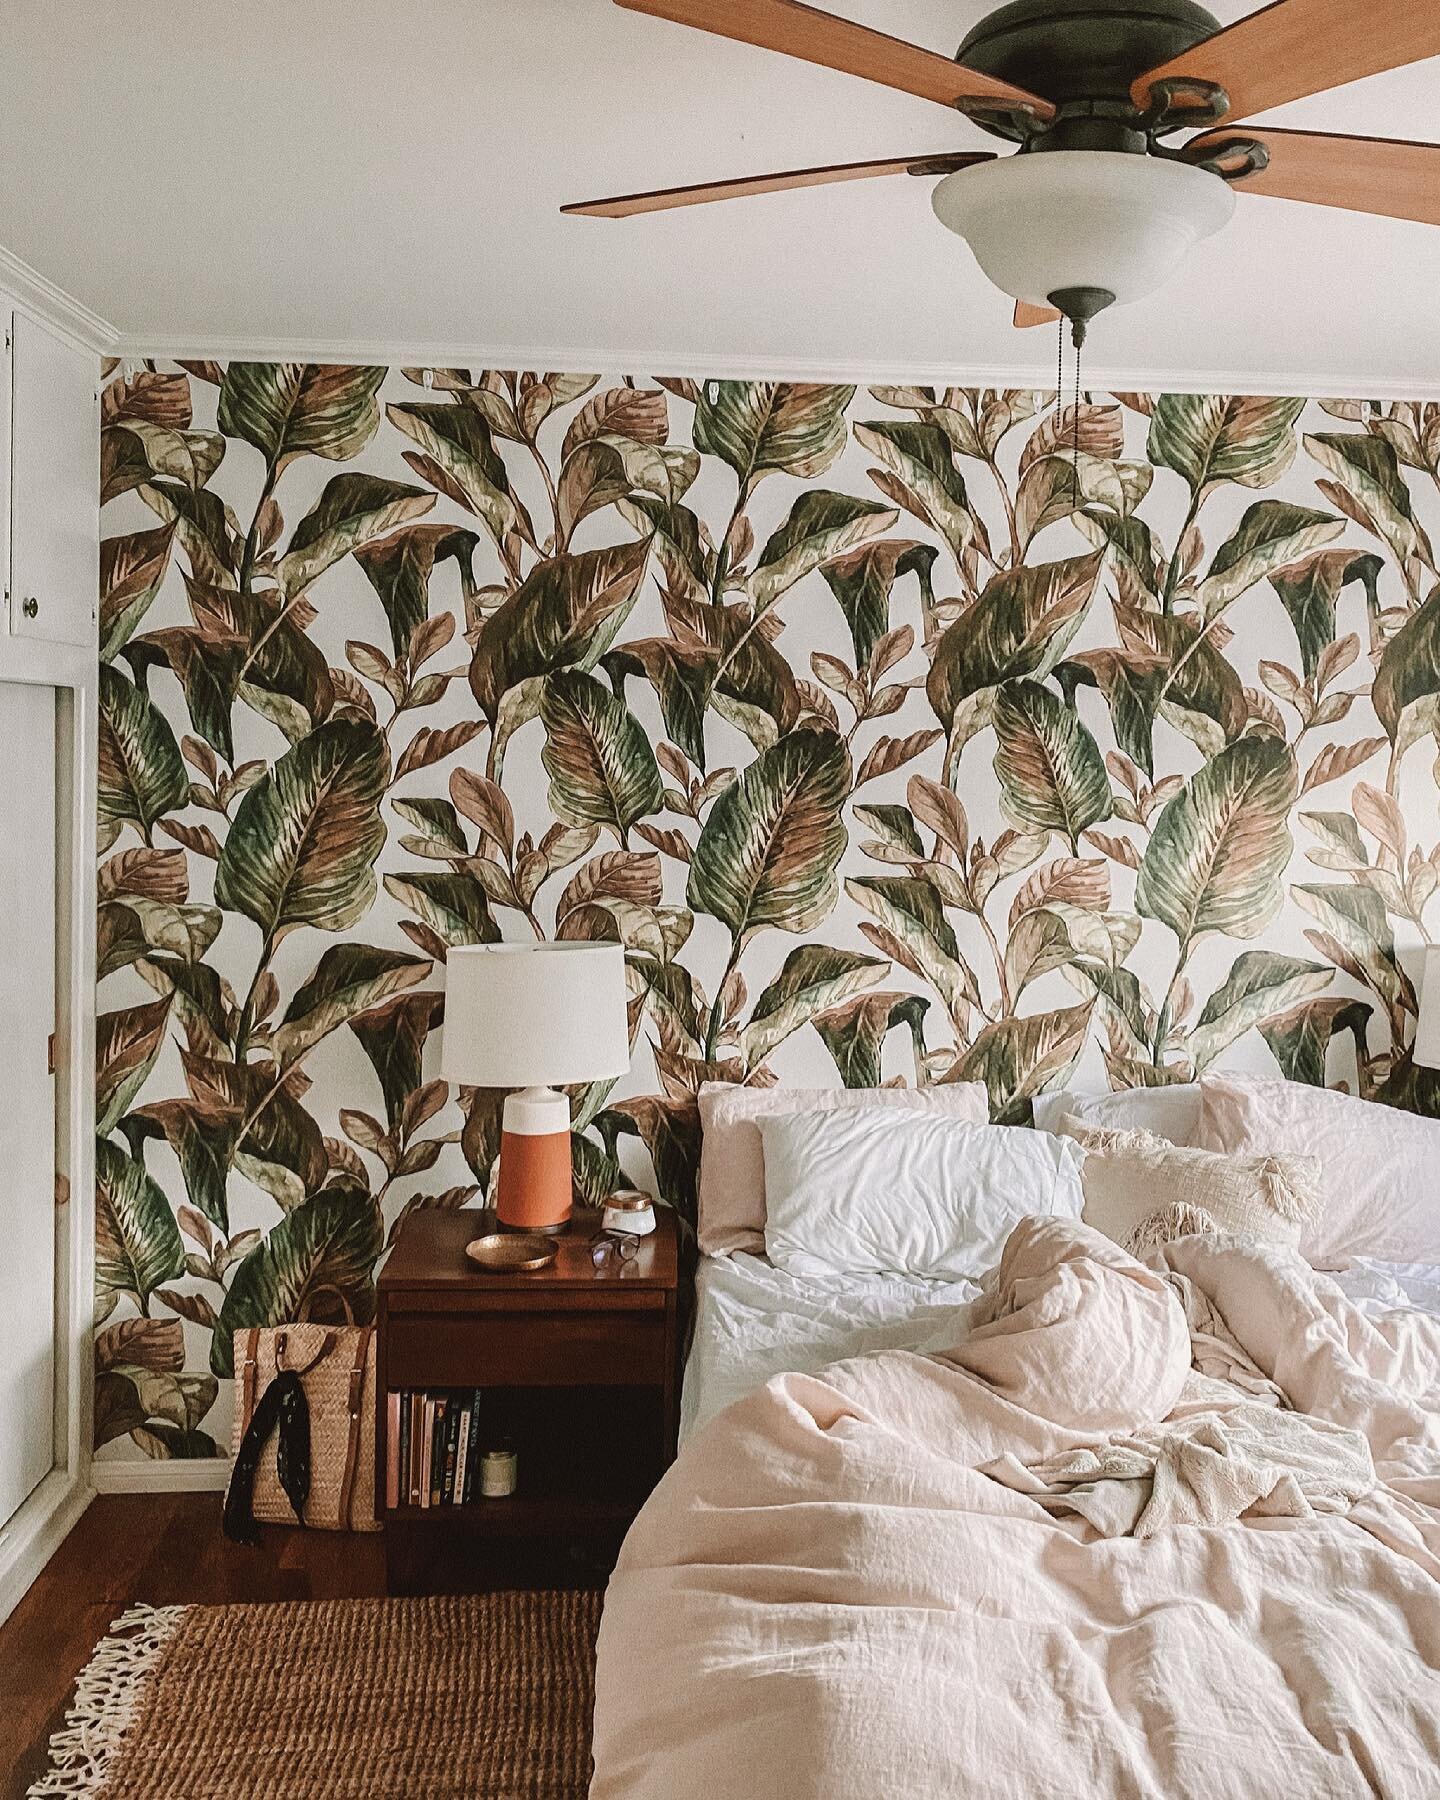 Like sleeping in a tropical cloud 🌿☁️✨
⠀
I have to admit, this wallpaper took some time to grow on me... but I now realize that it&rsquo;s taught me the power of adaptability. Accepting a place or thing for how it is, and finding a way to groove alo